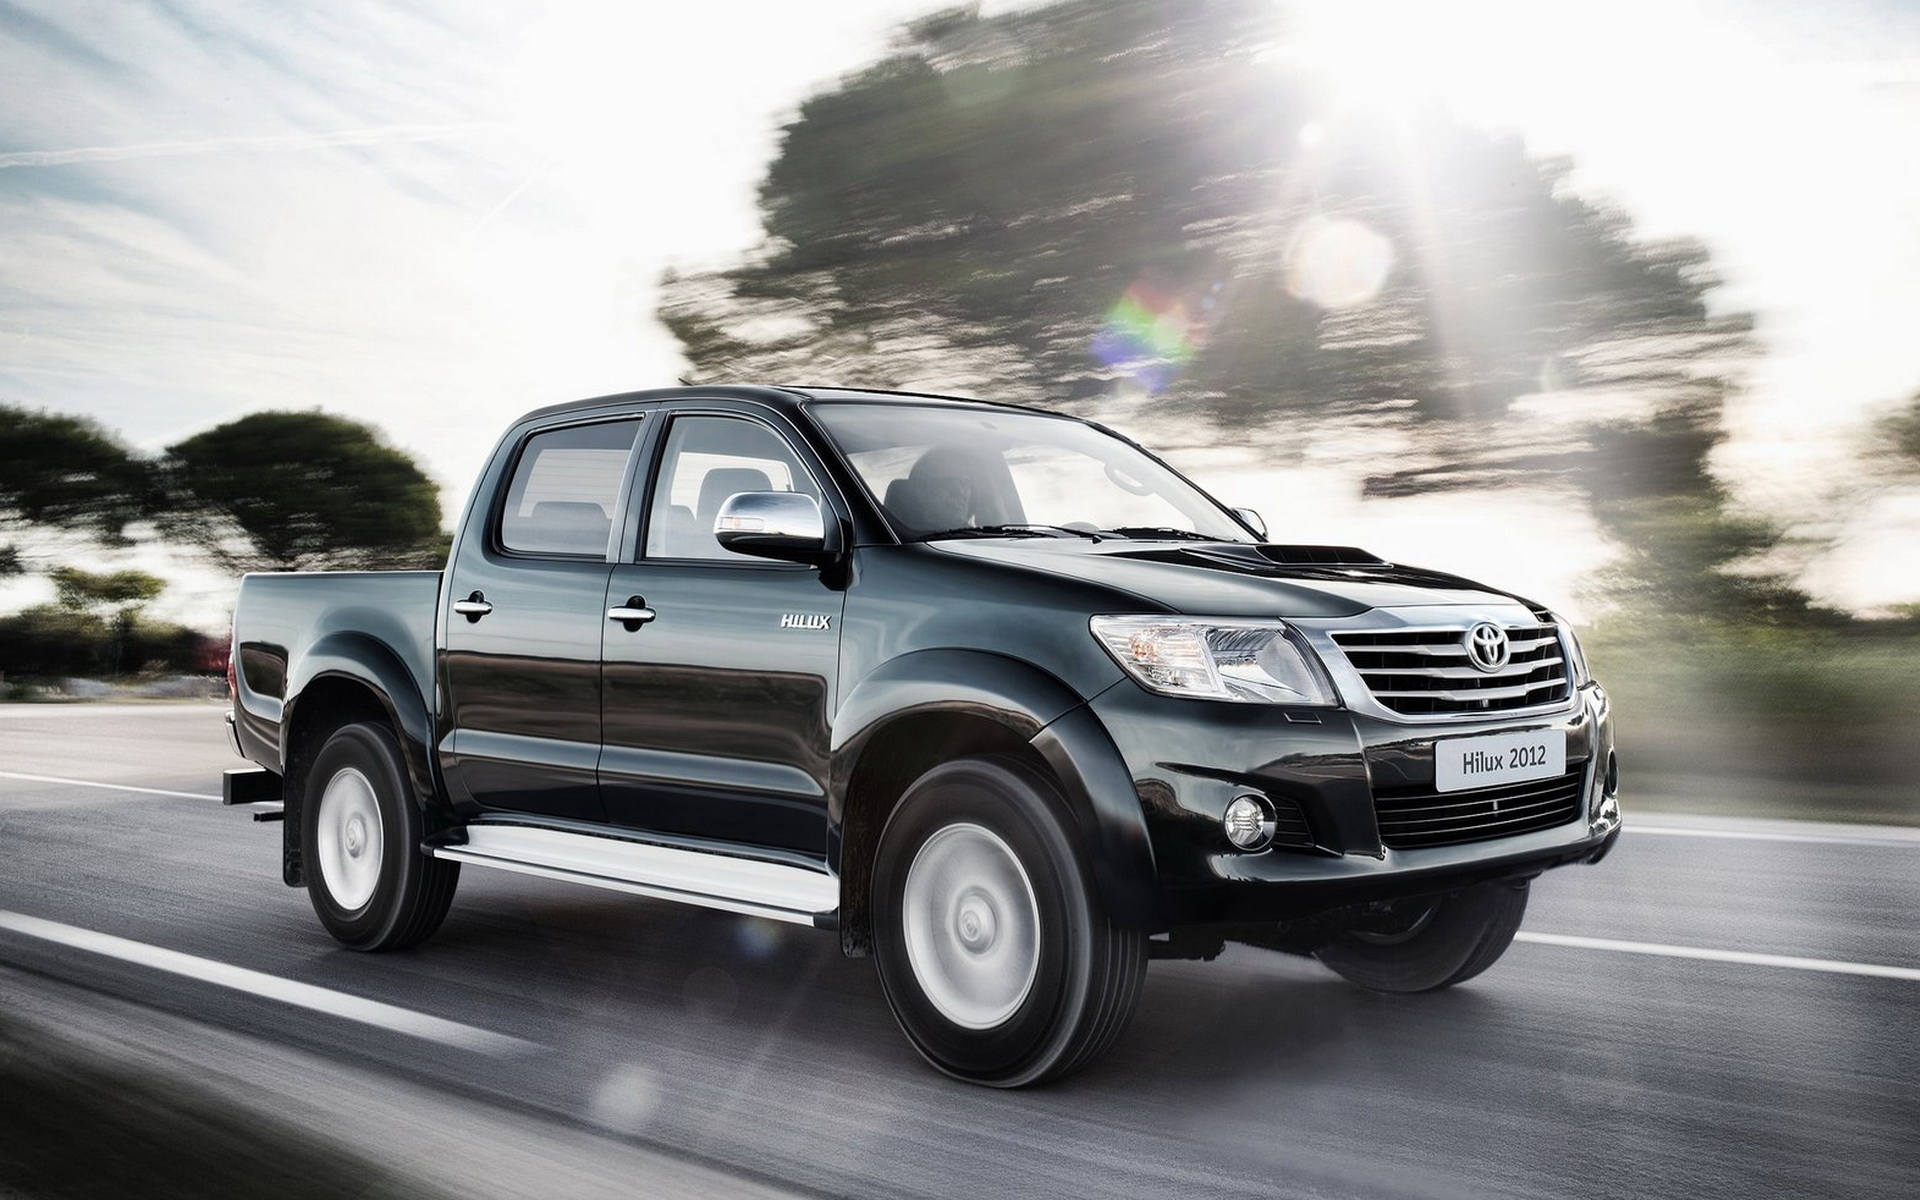 Toyota-Hilux wallpapers and images - wallpapers, pictures ...